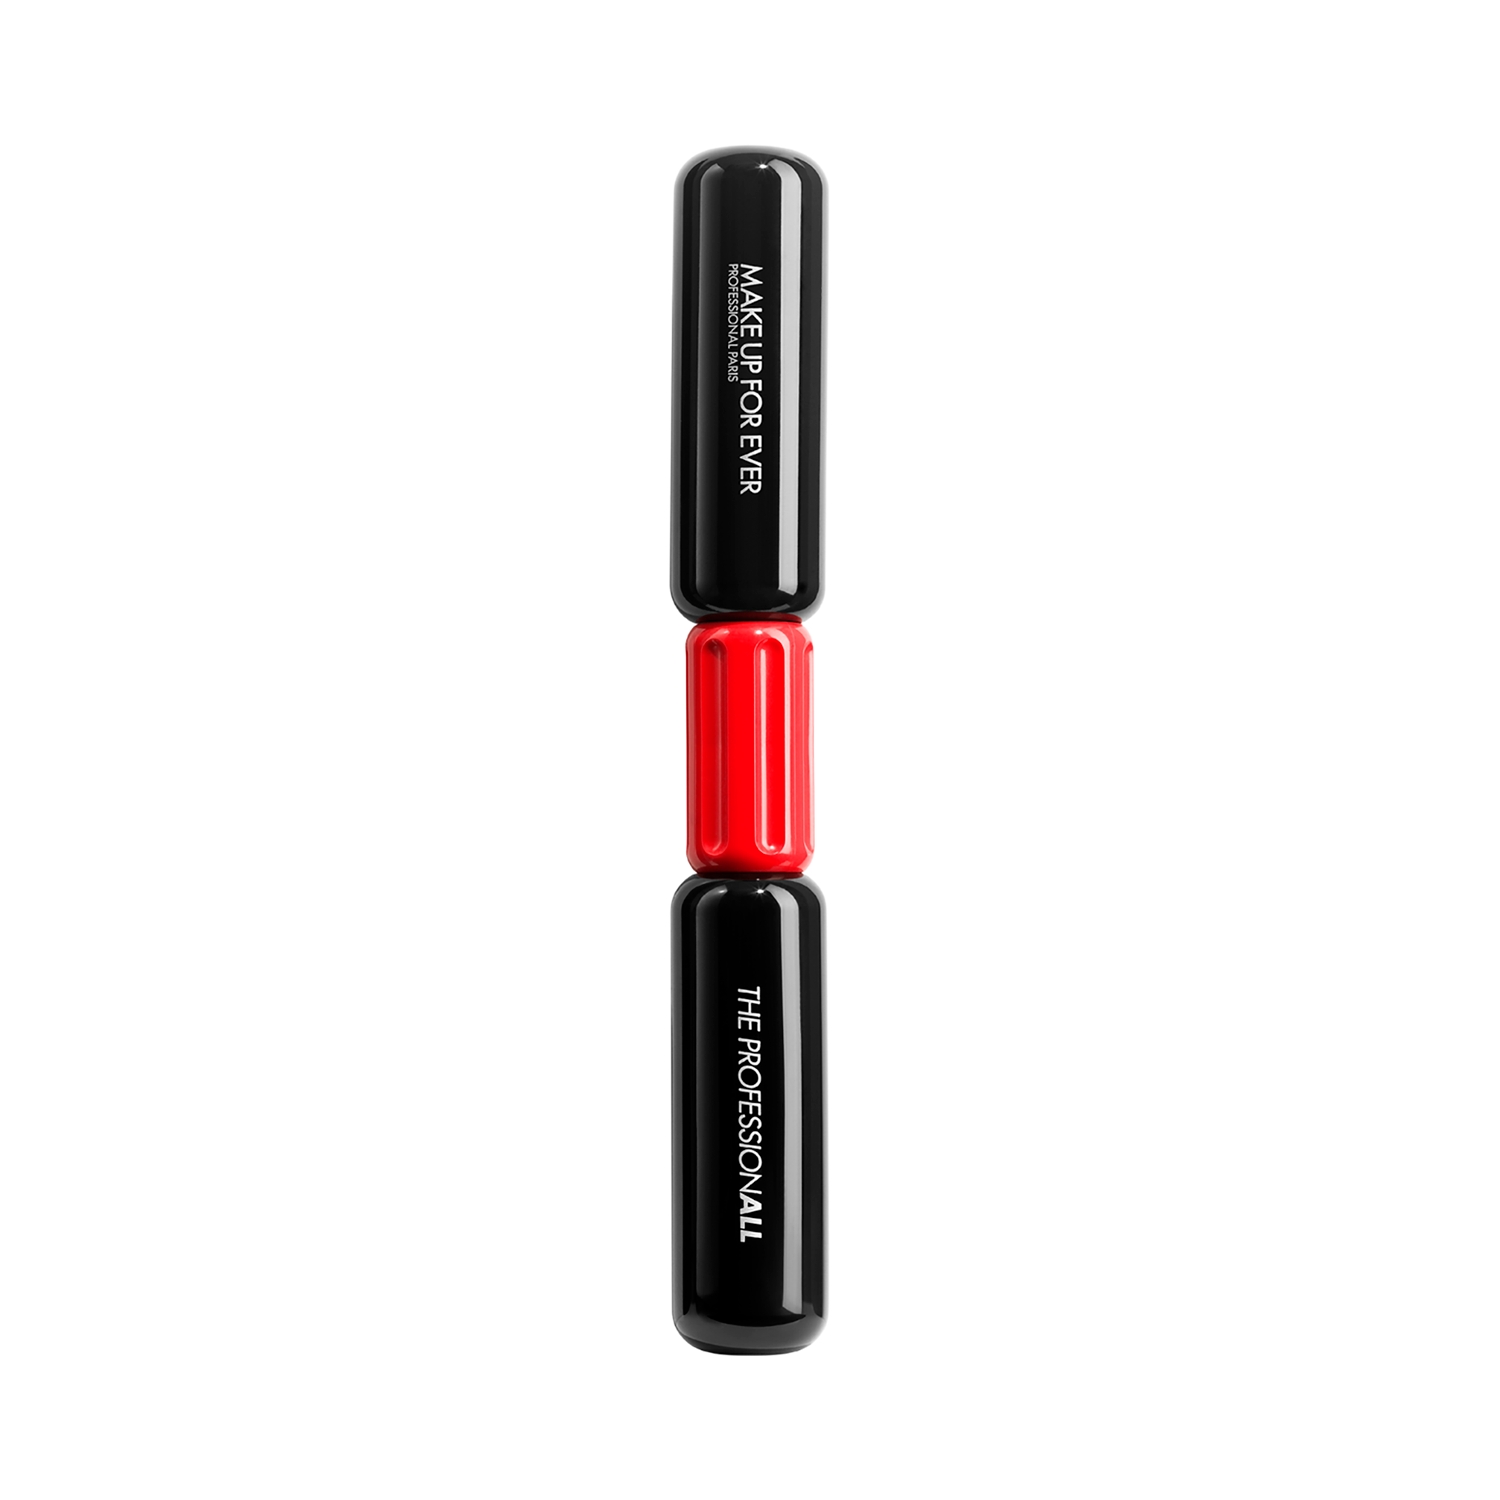 Make Up For Ever | Make Up For Ever The Professional 24HR Double-Ended Lifting & Volumizing Mascara - Black (16ml)